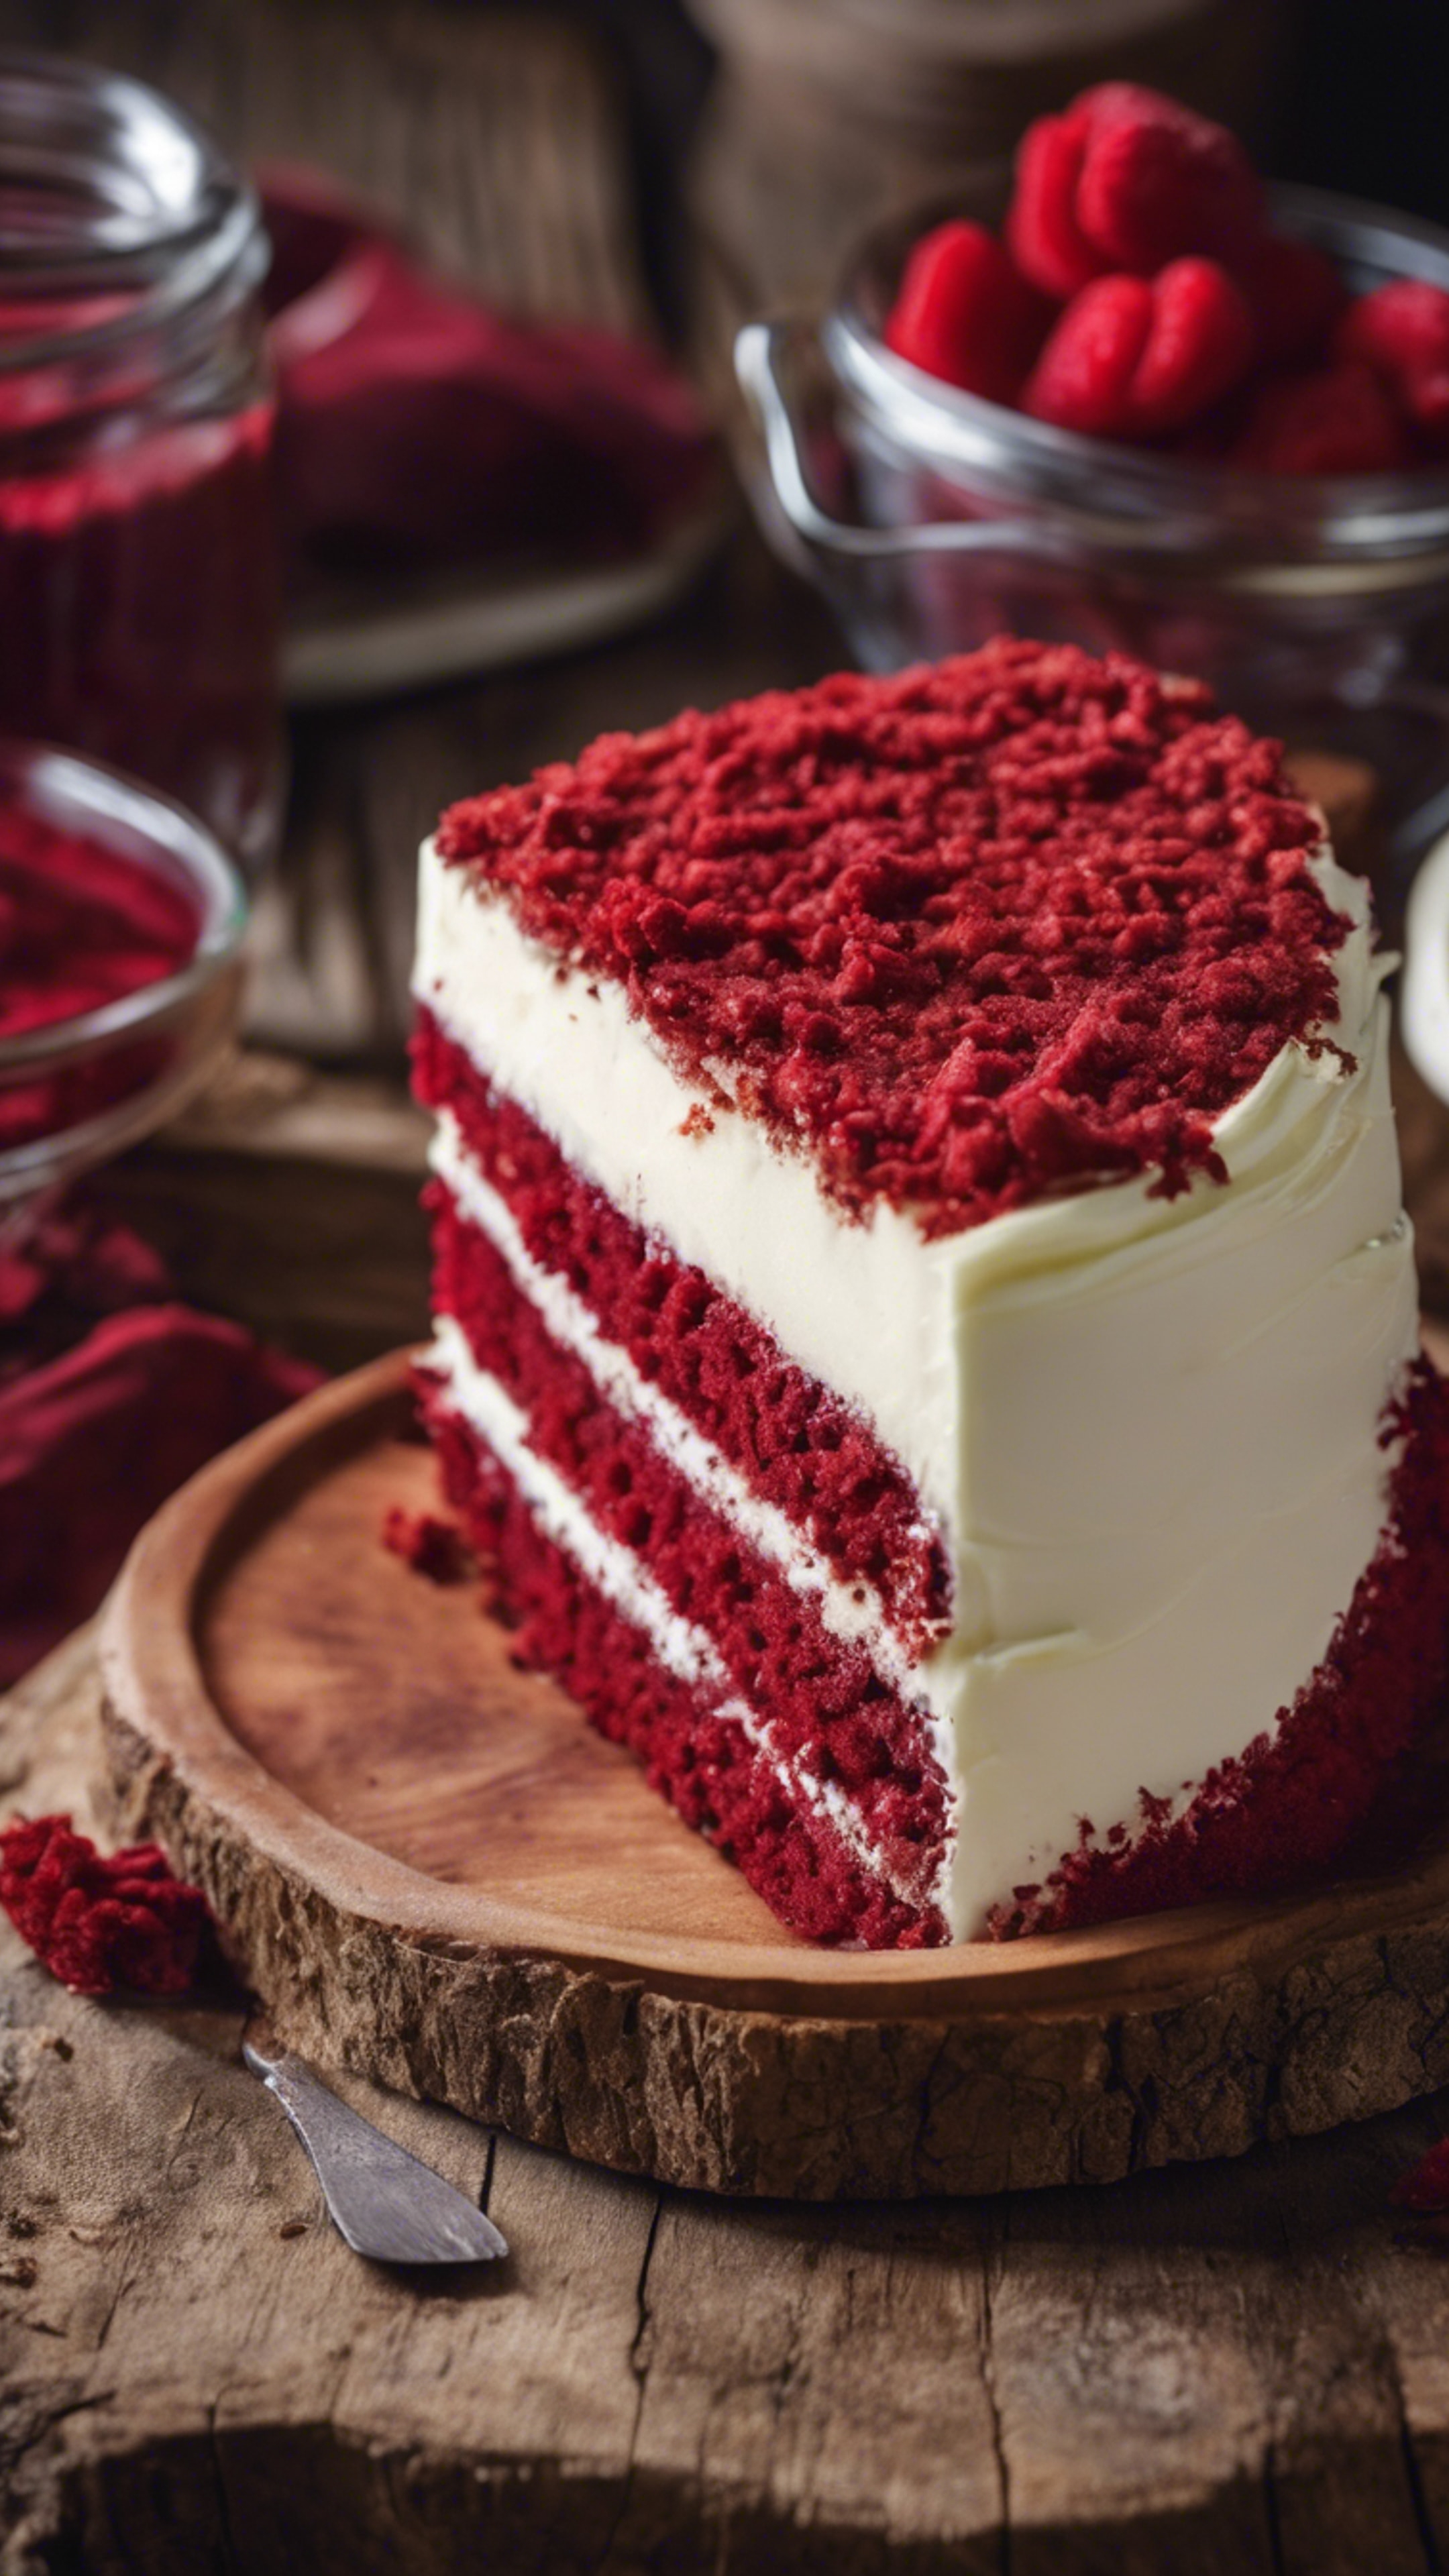 A slice of rich red velvet cake with a layer of cream cheese frosting, placed on a rustic wooden table. ផ្ទាំង​រូបភាព[5b147ad1f433484e86de]